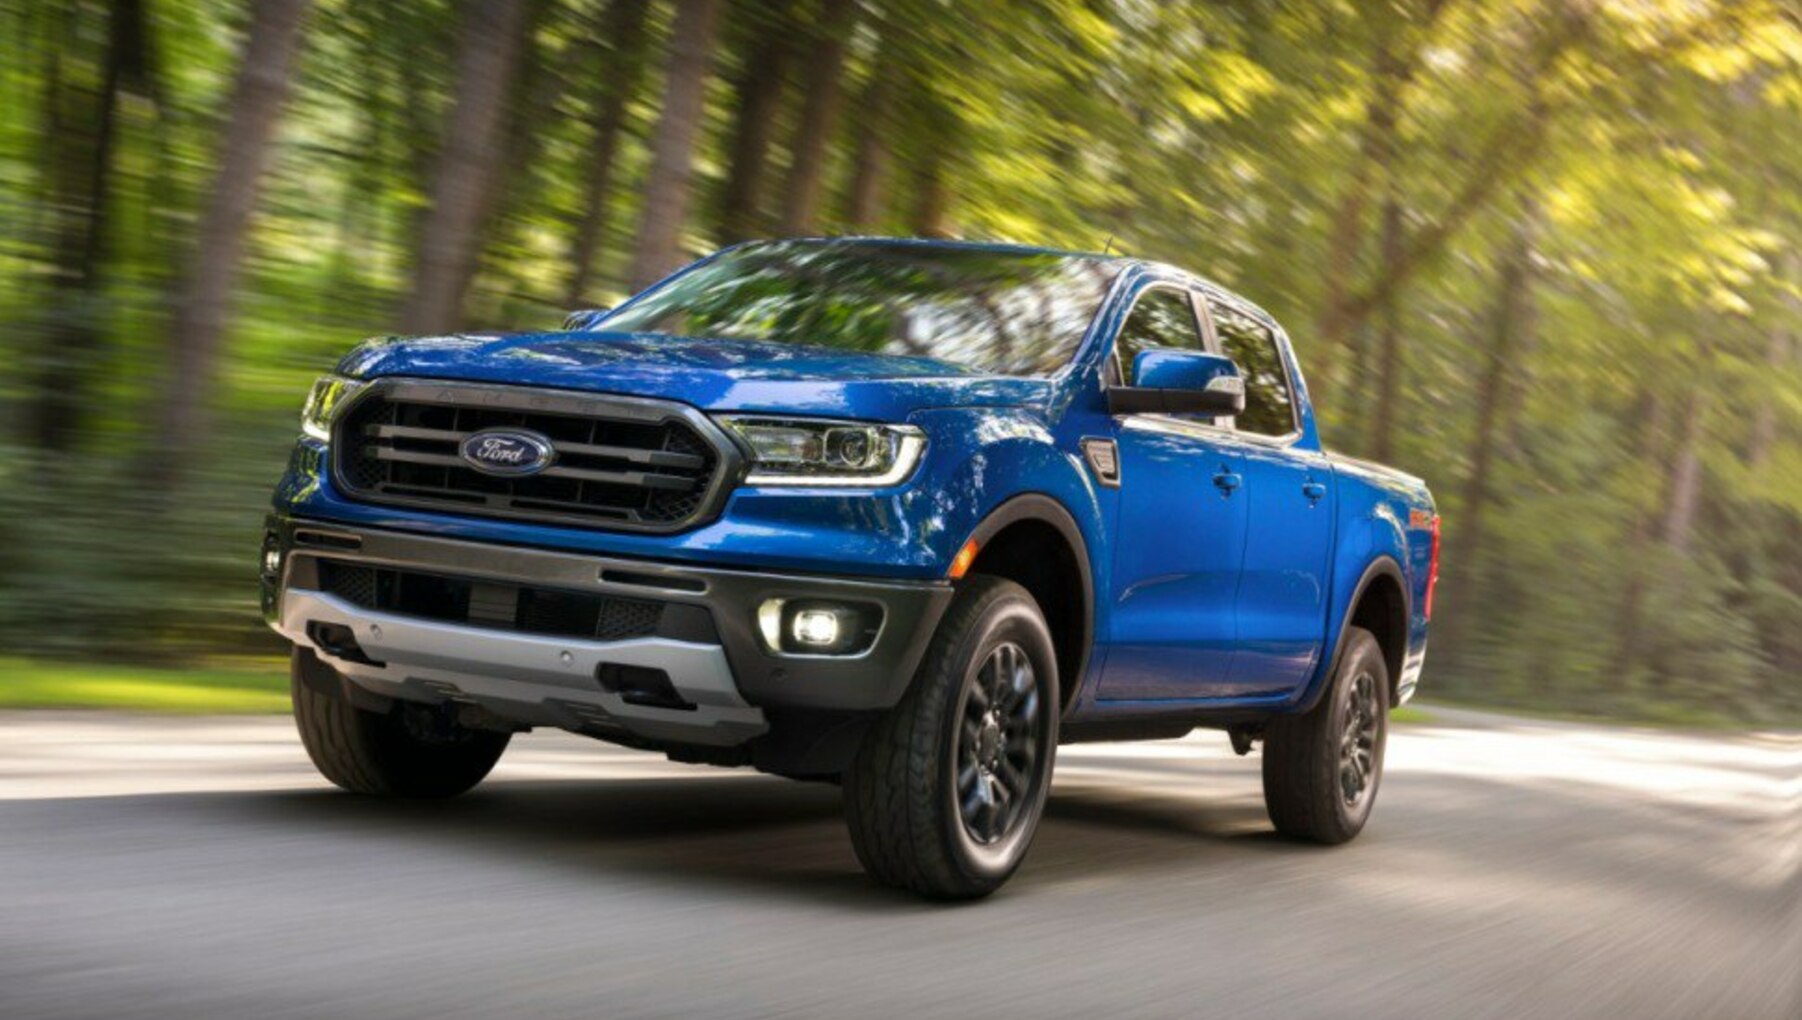 Ford Ranger III Double Cab (facelift 2019) 2.0 EcoBlue (170 Hp) 4x4 2019, 2020, 2021 